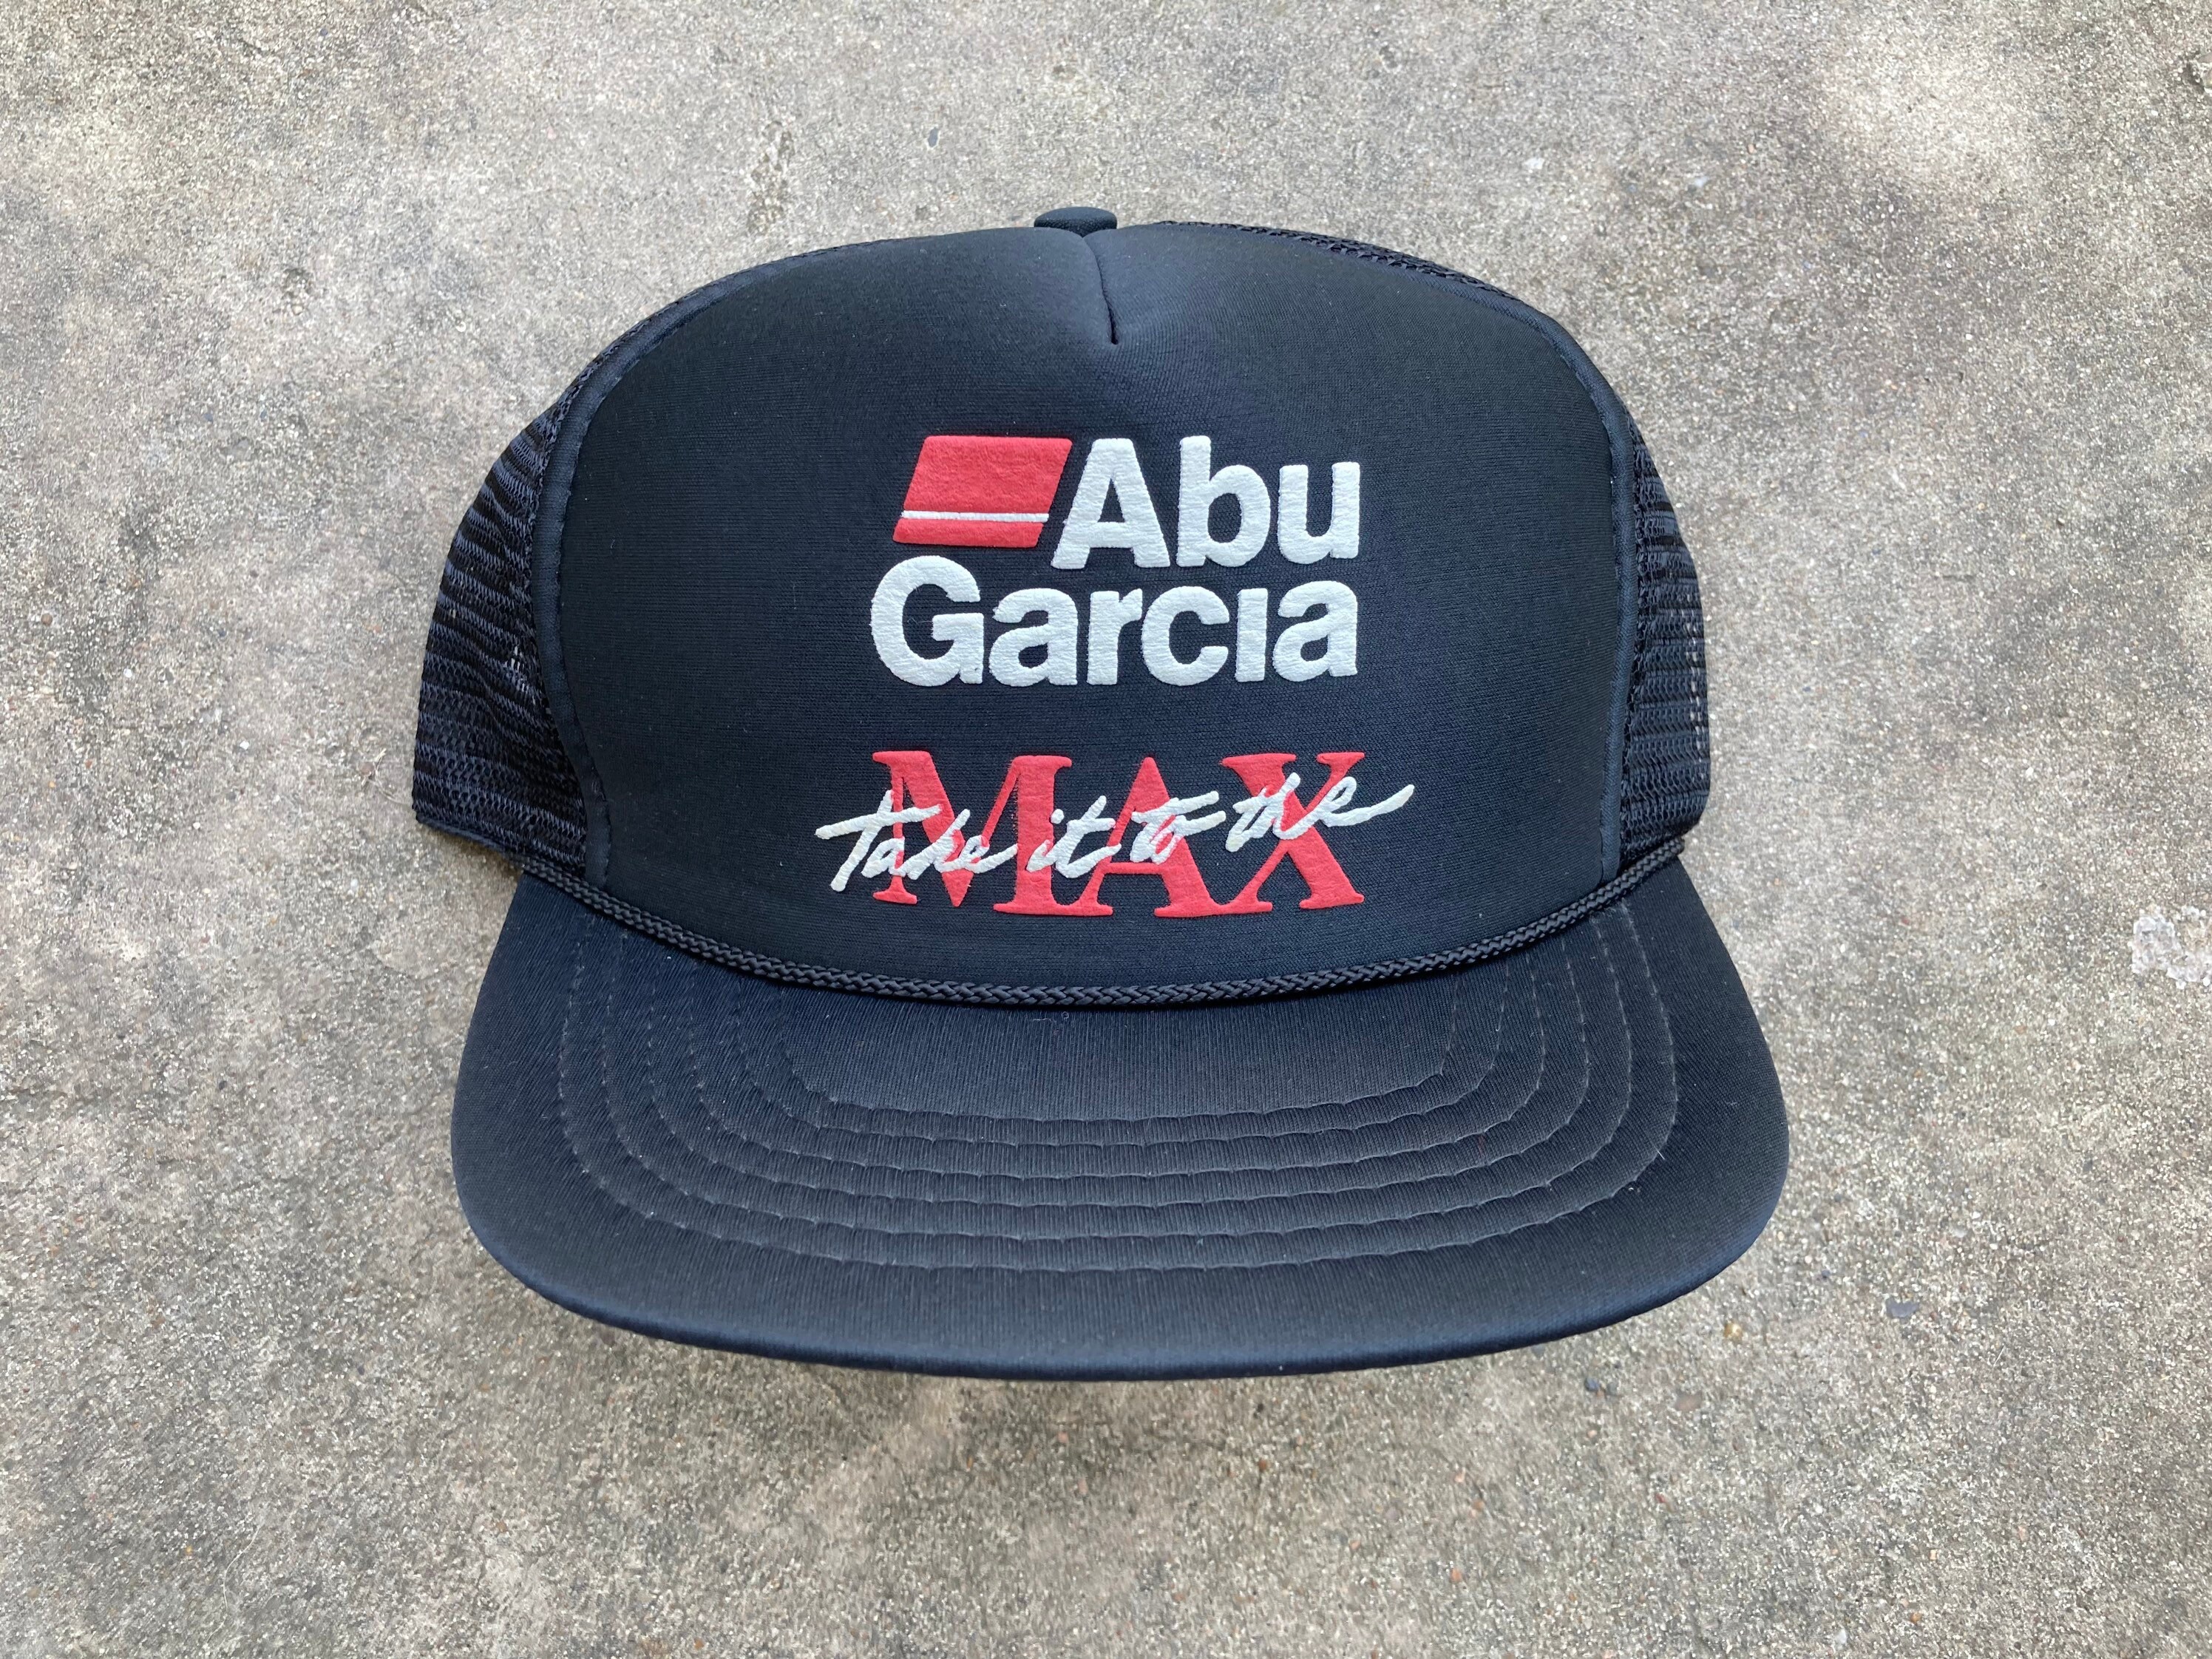 Vintage 90's Abu Garcia Take It to The Max Meshback Hat by Cetco